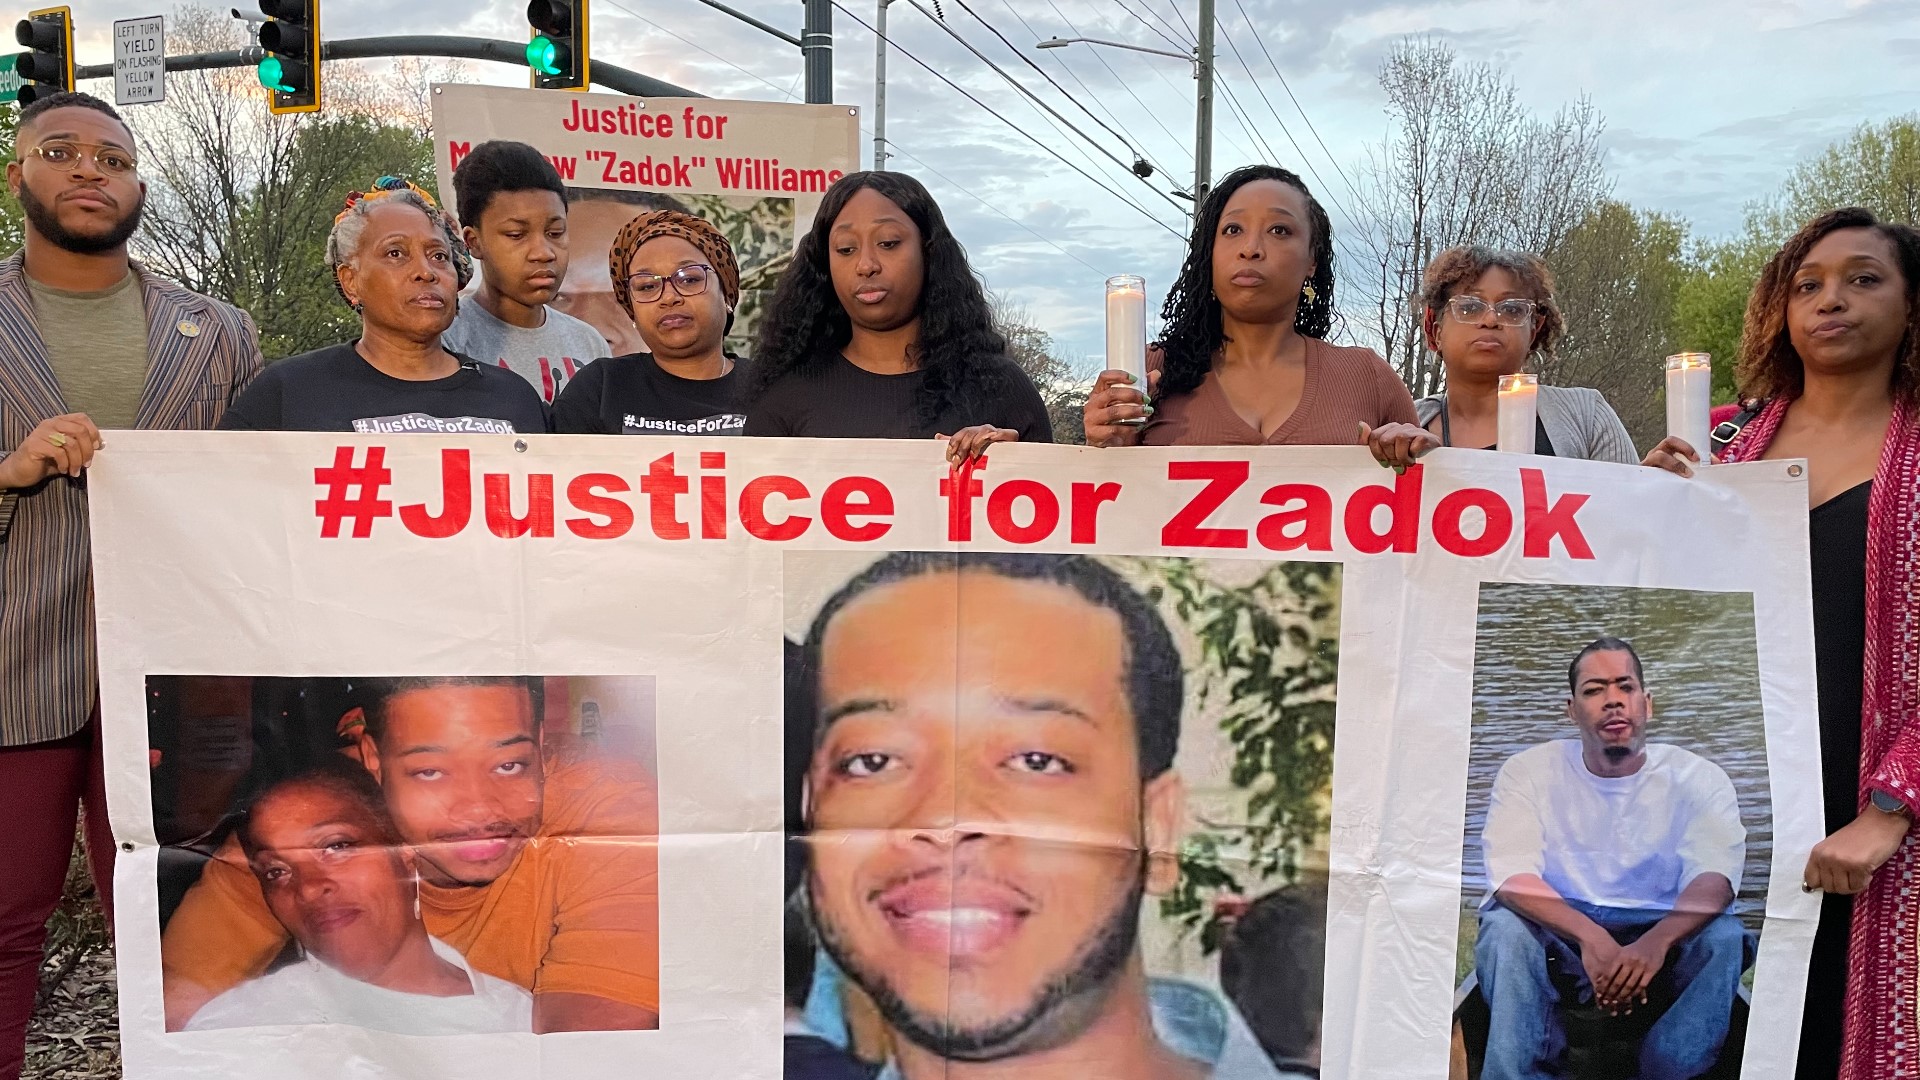 Activists and the family of Matthew “Zadok” Williams will present a 40,000-signature petition to the DeKalb County District Attorney.